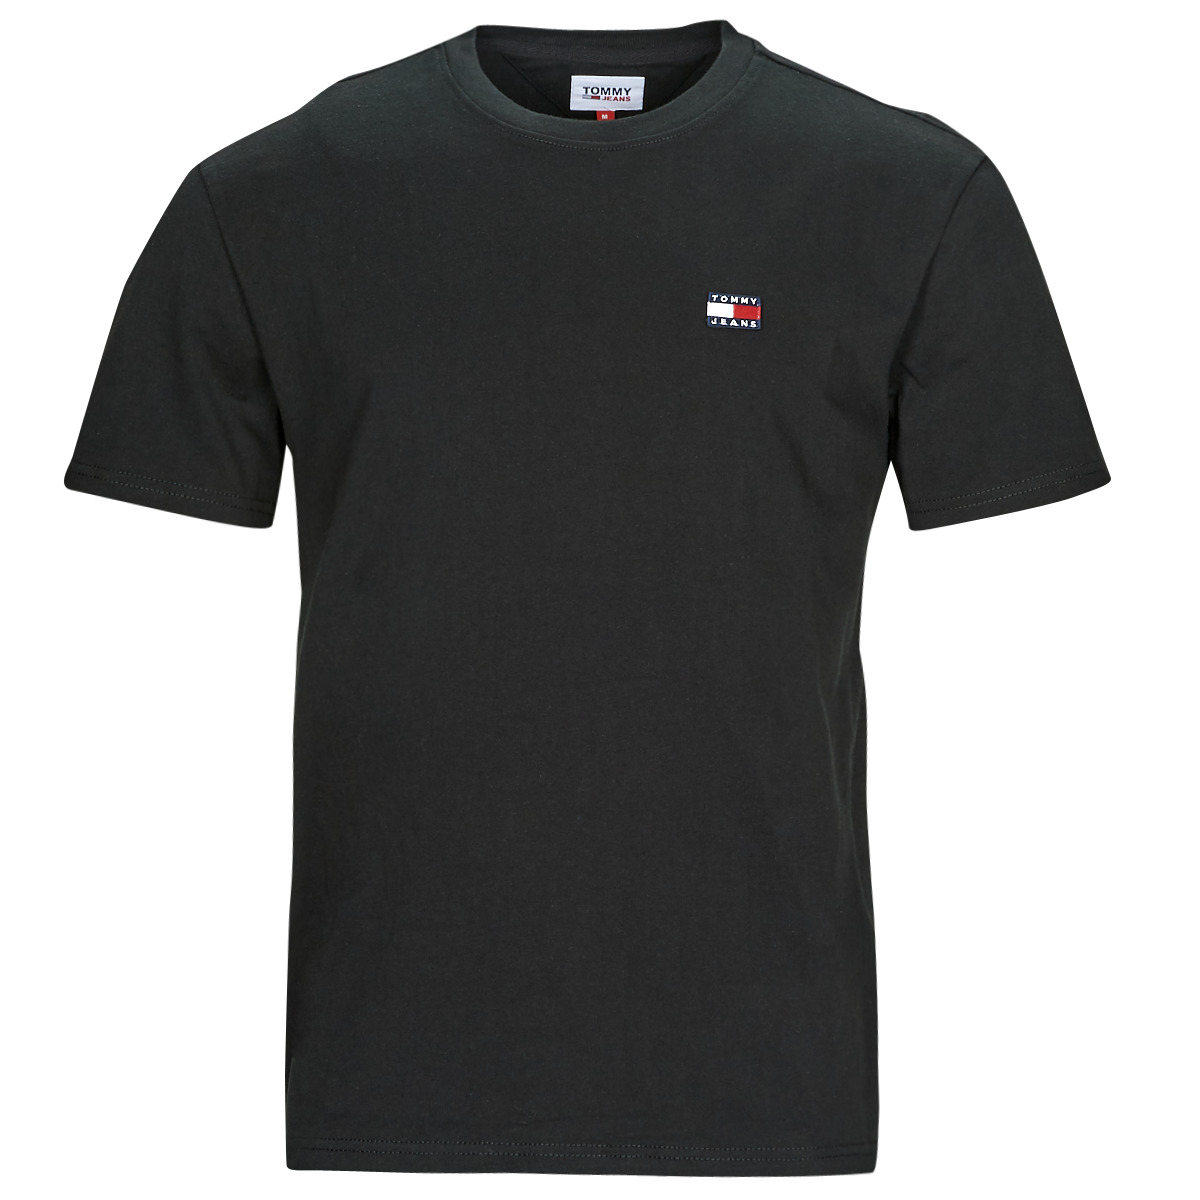 Clothing t-shirts NET XS delivery - TJM TEE - short-sleeved BADGE Black Spartoo Tommy | Jeans Free Men CLSC TOMMY !